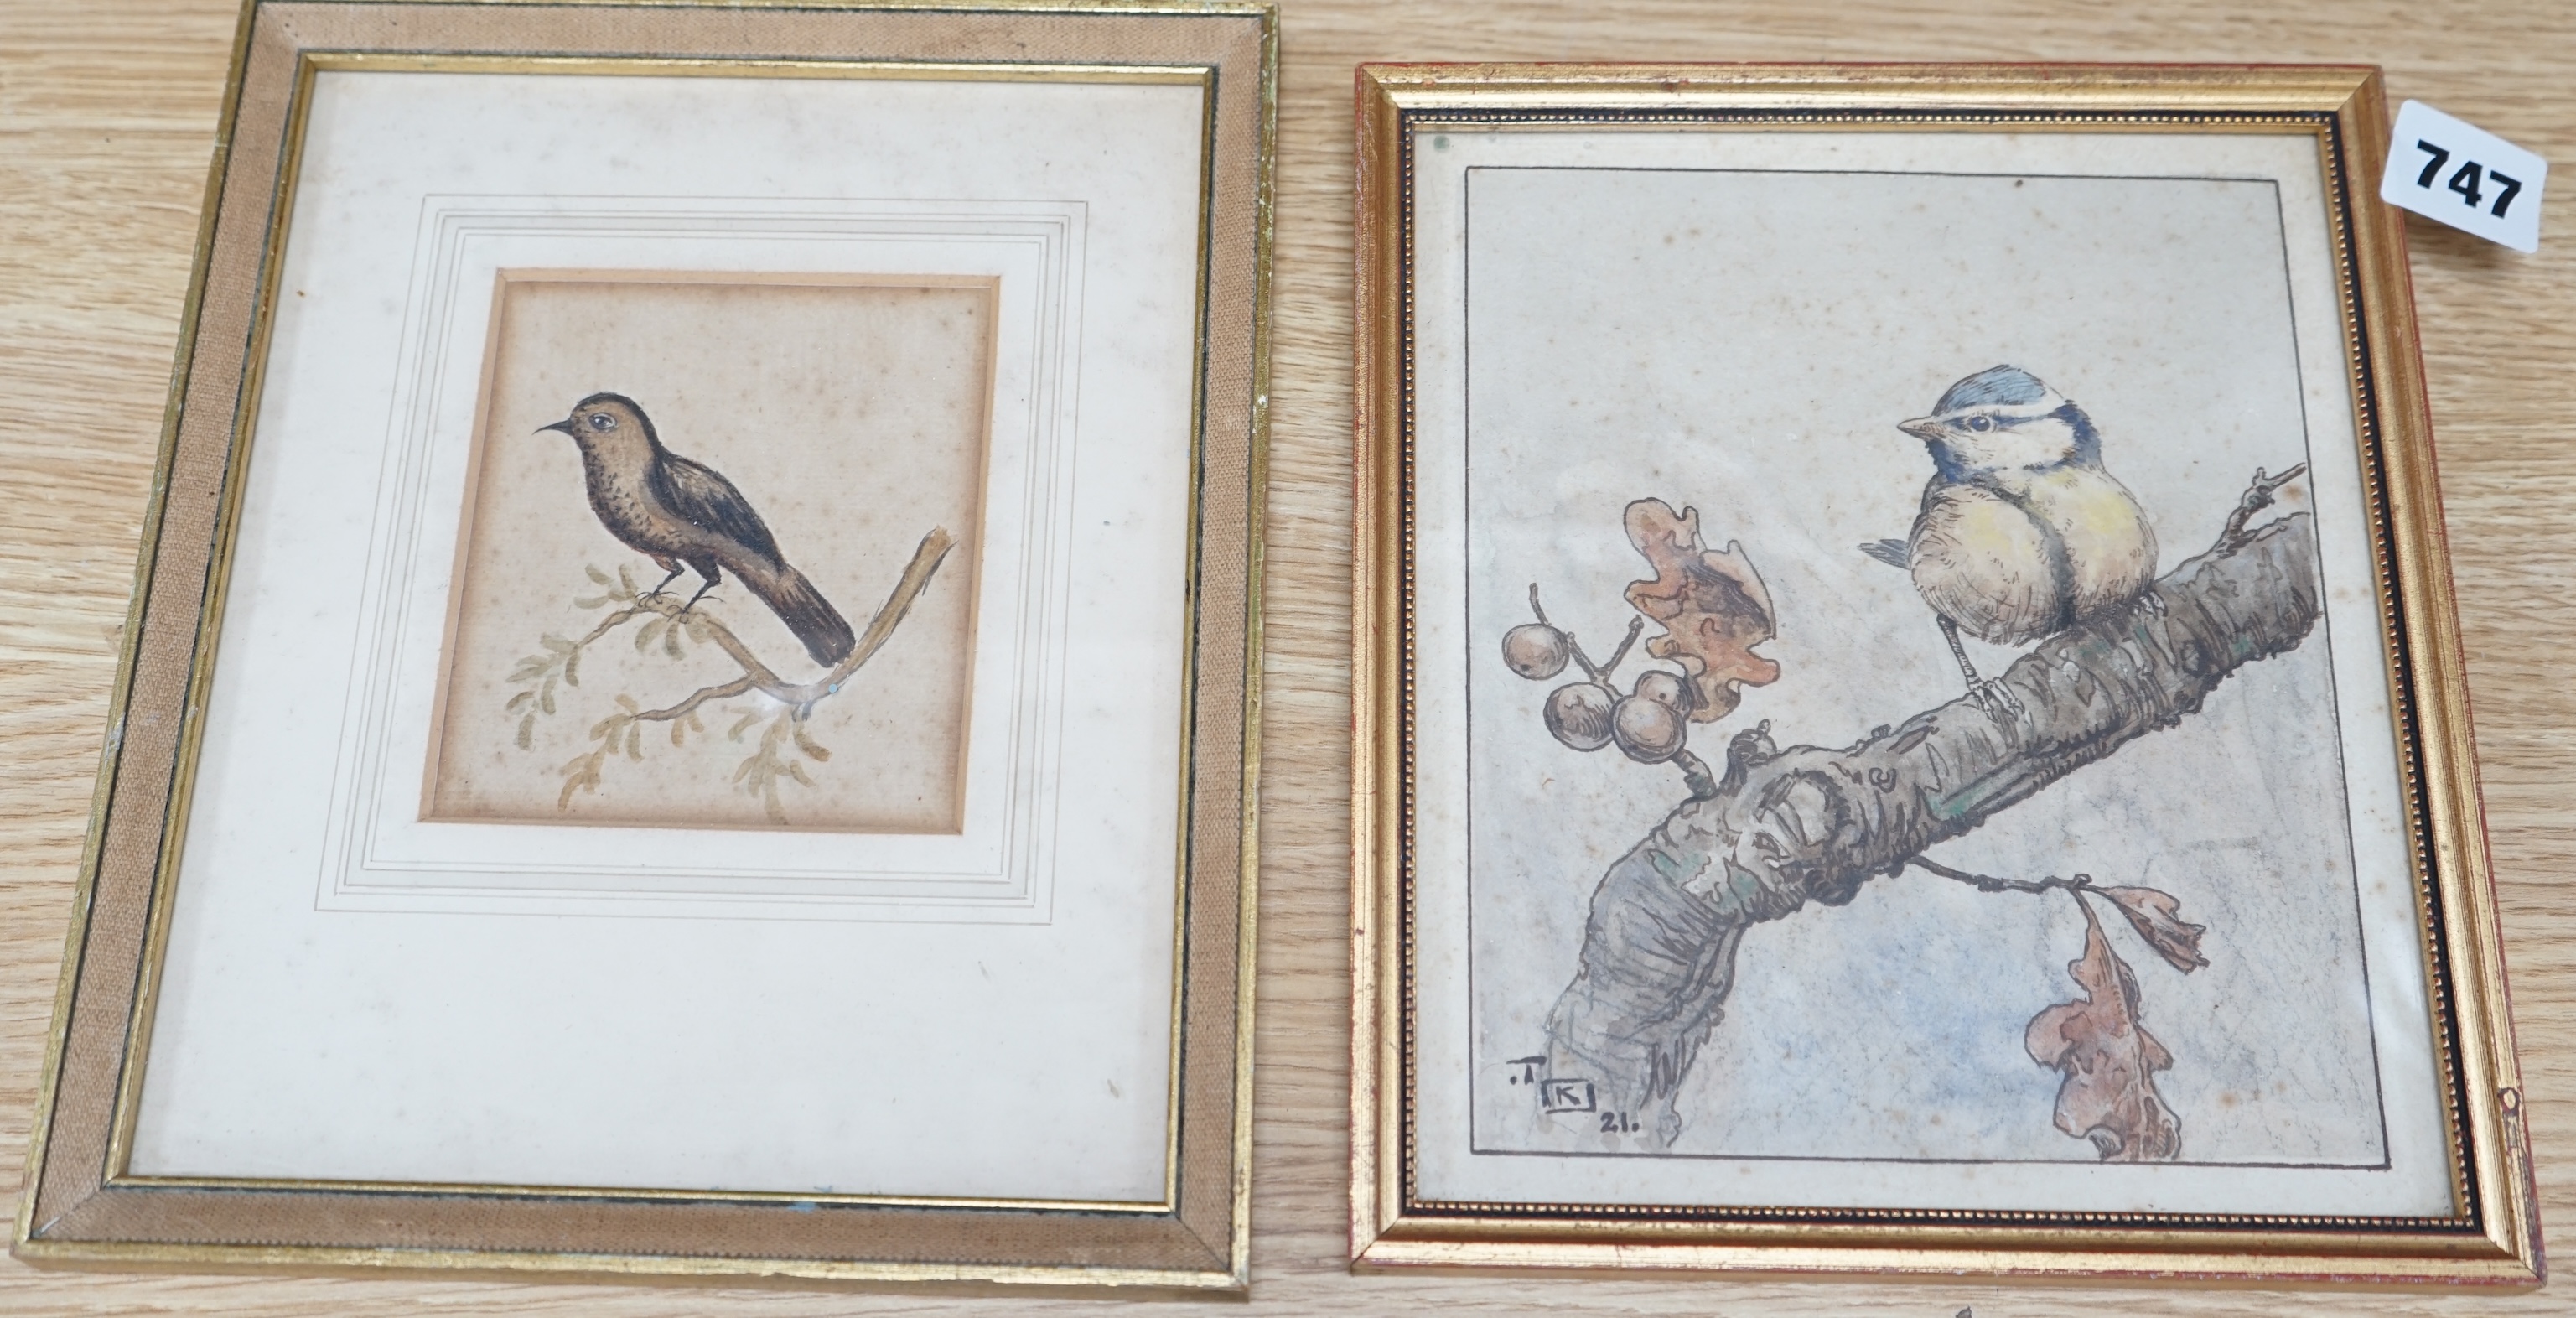 Talbot Kelly (1896-1971), watercolour, Birds on a branch, monogrammed and dated ‘21, together with a similar example, unsigned, largest 20 x 17cm. Condition - poor